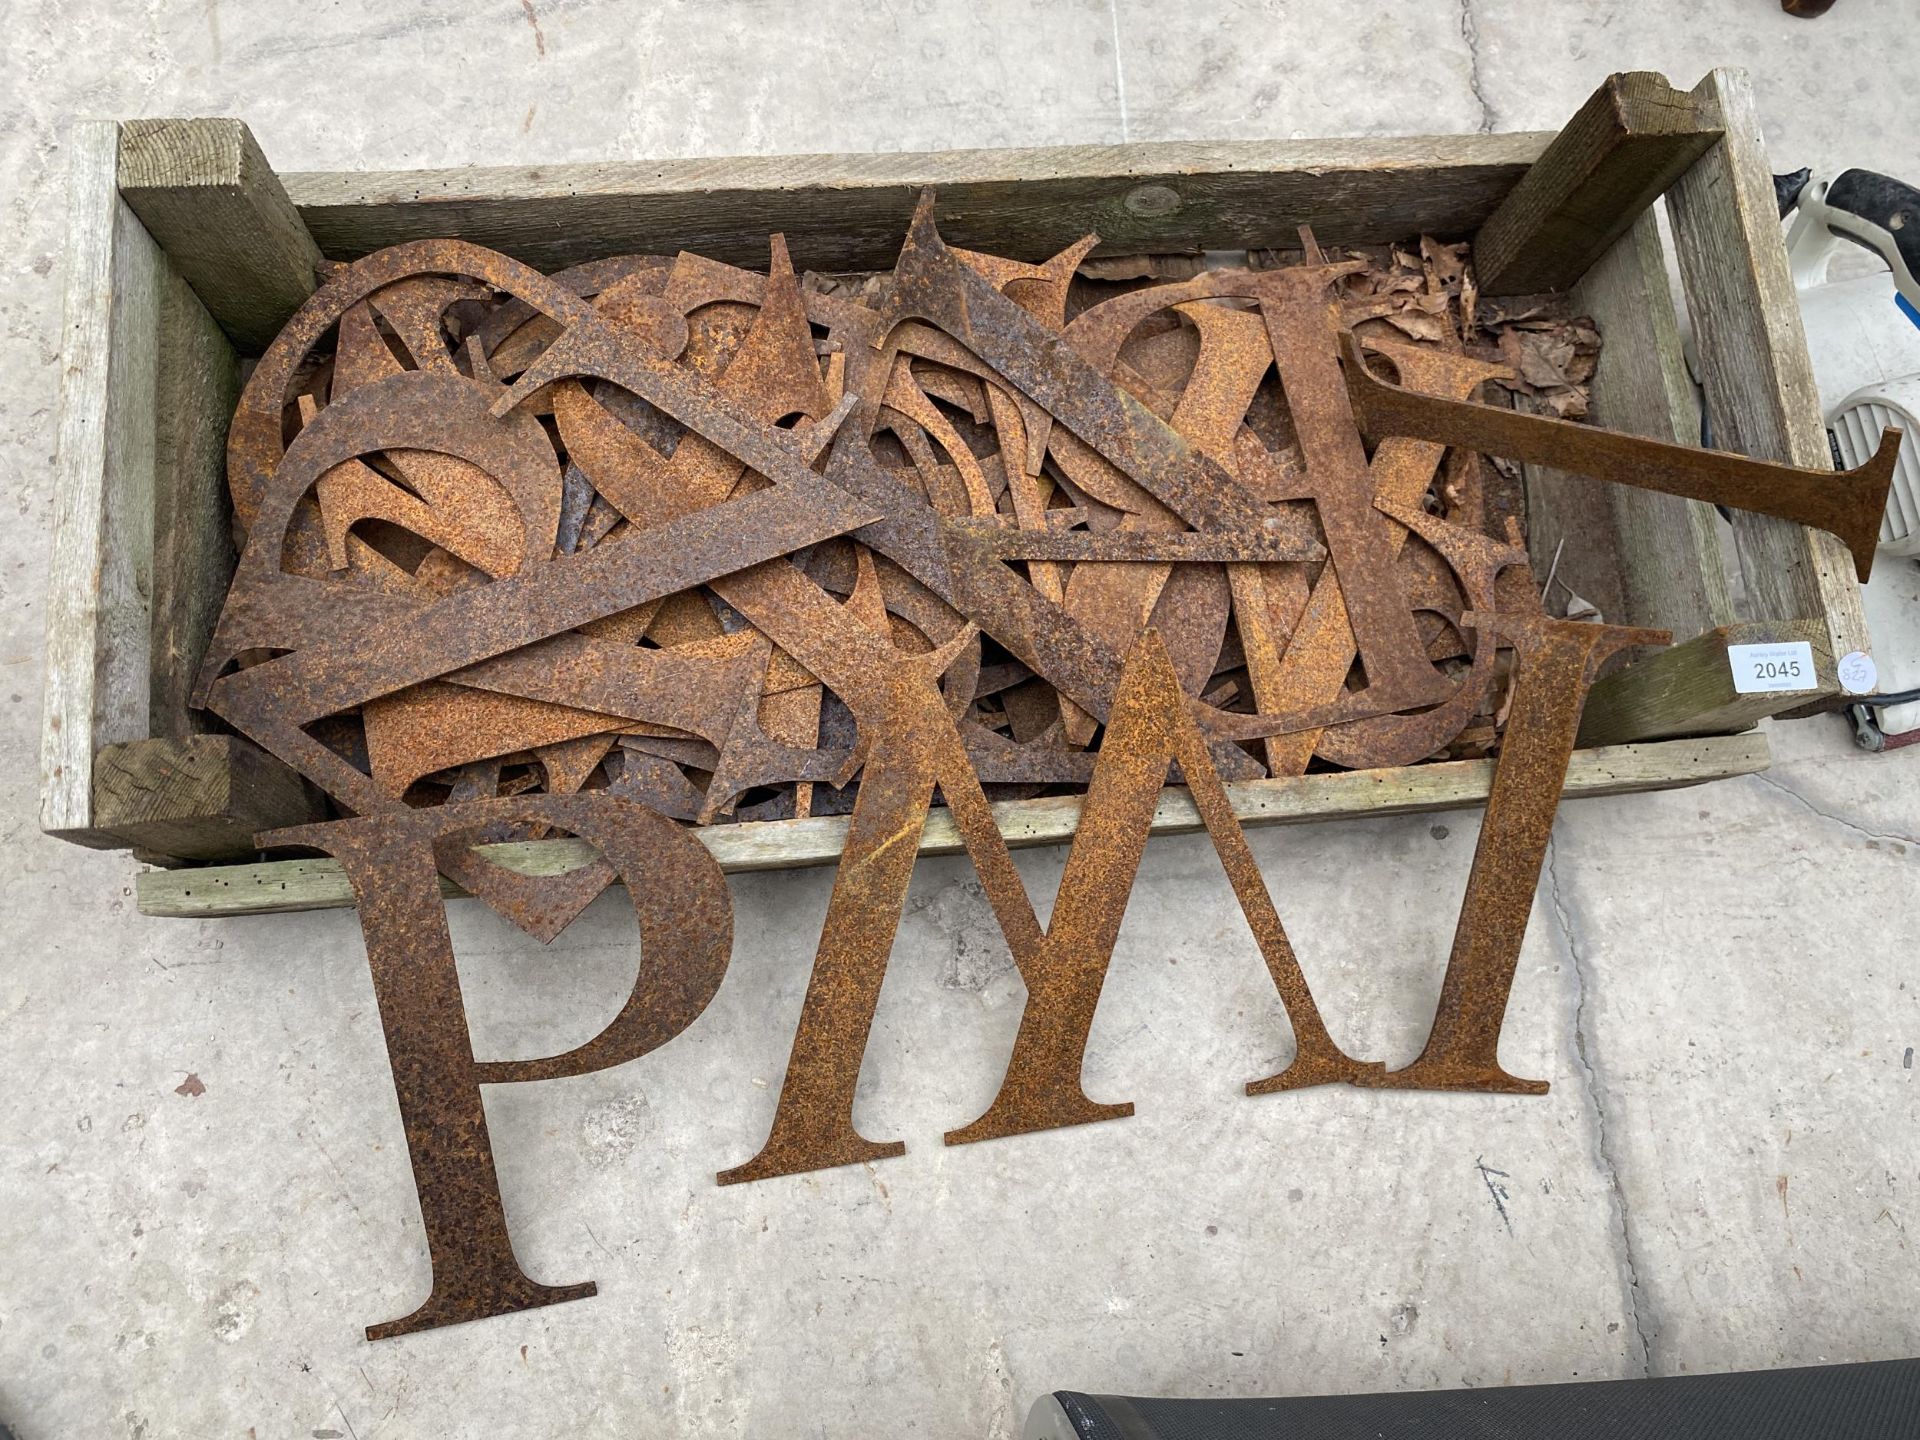 A WOODEN TRAY OF VINTAGE METAL LETTERS